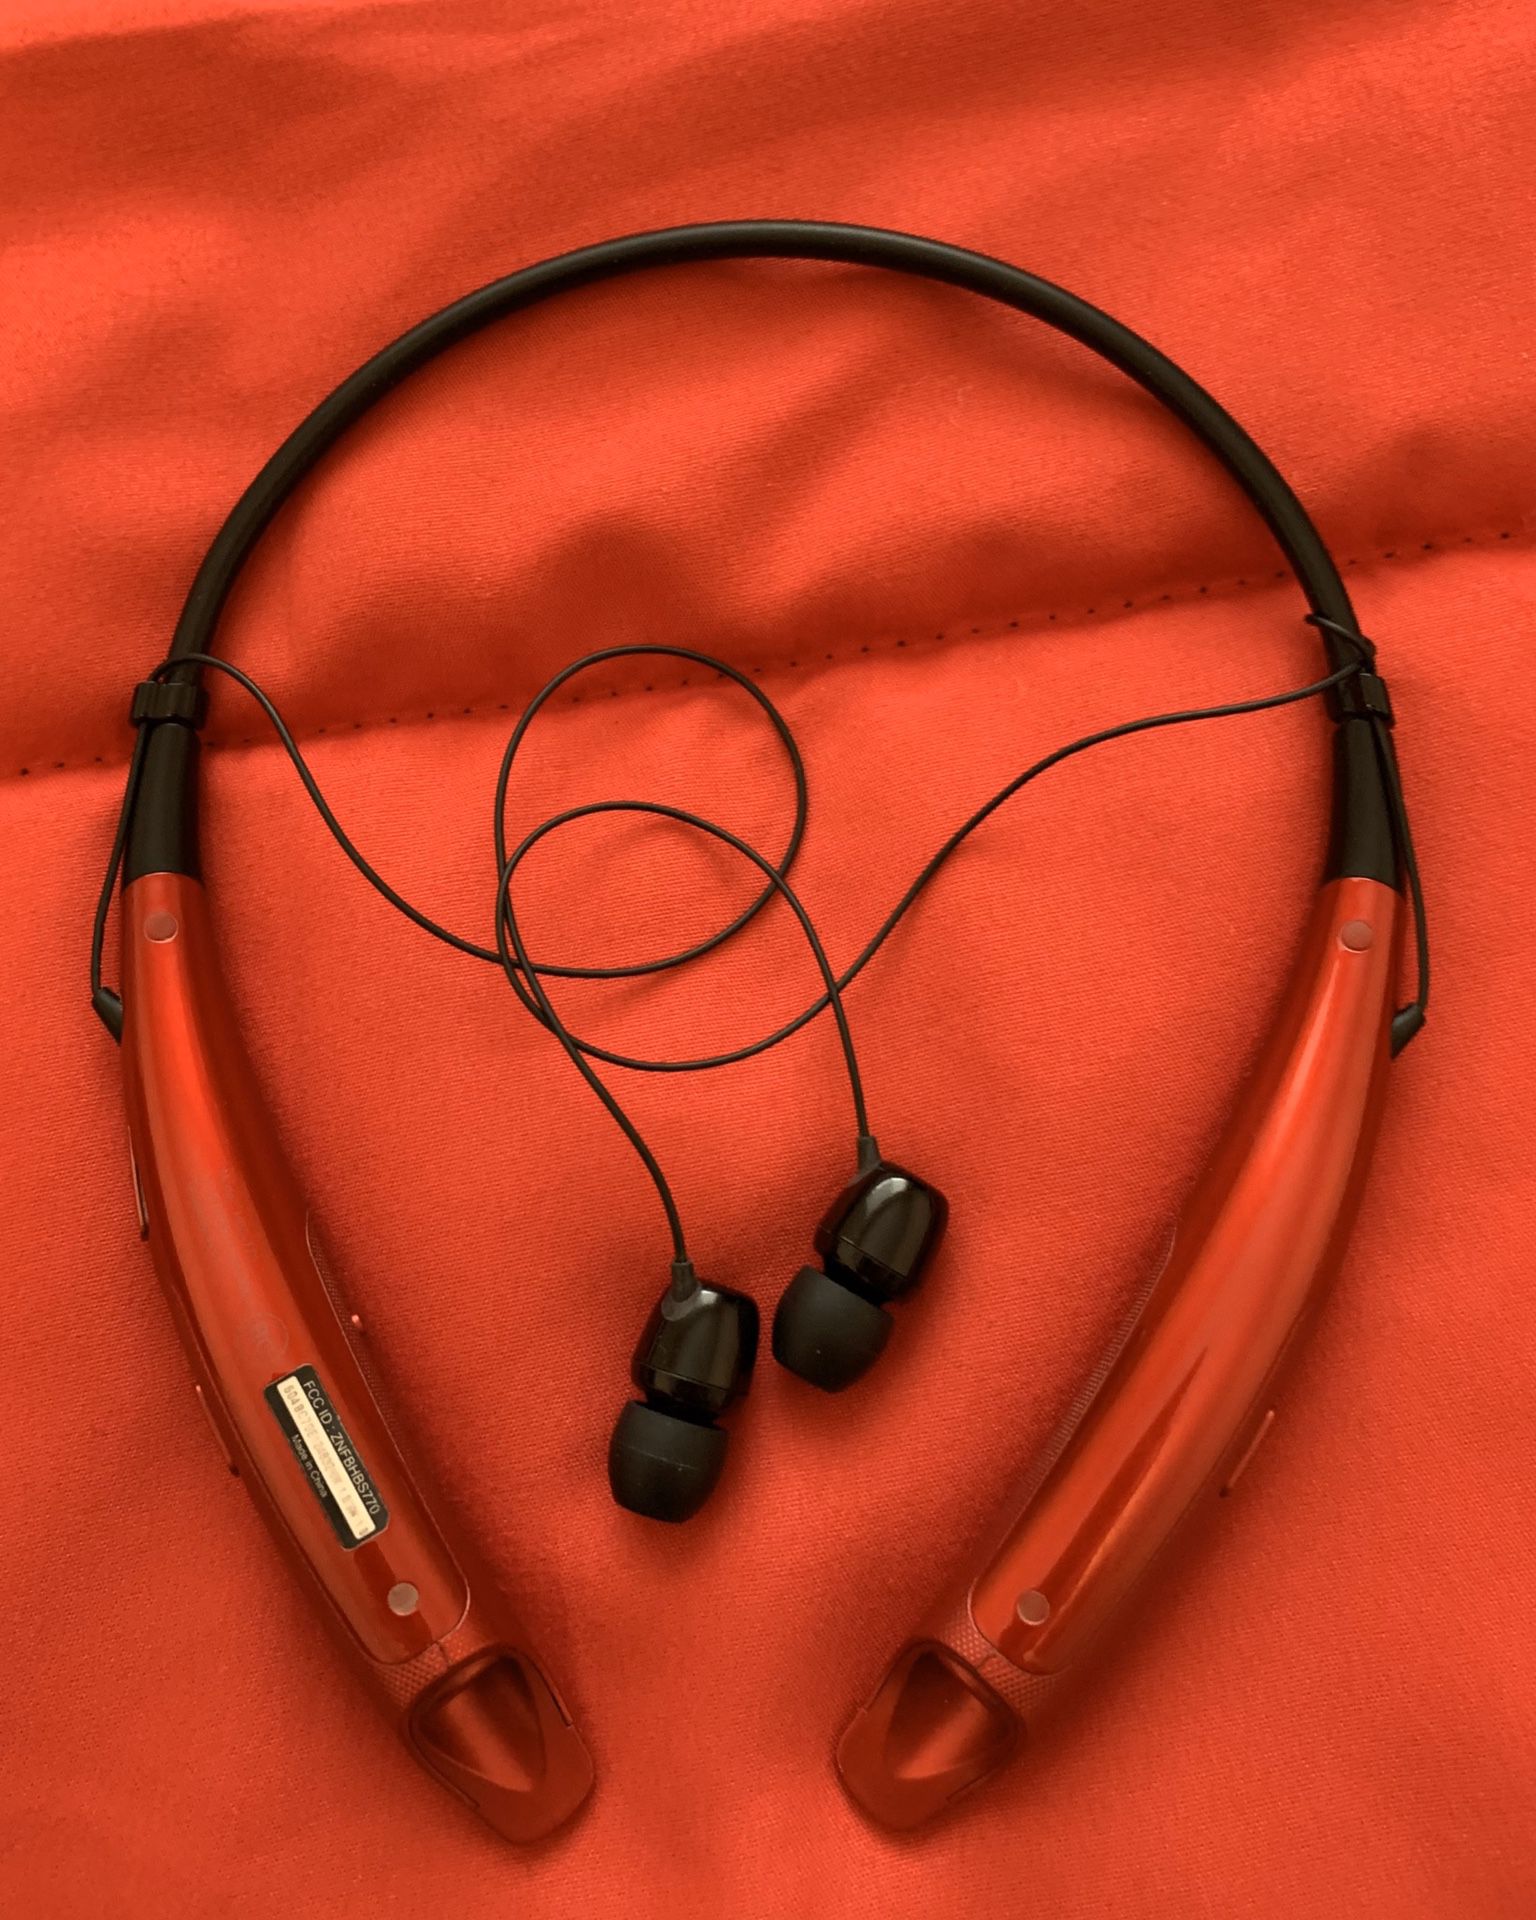 LG Bluetooth Headphones. Great condition. Price is FIRM!